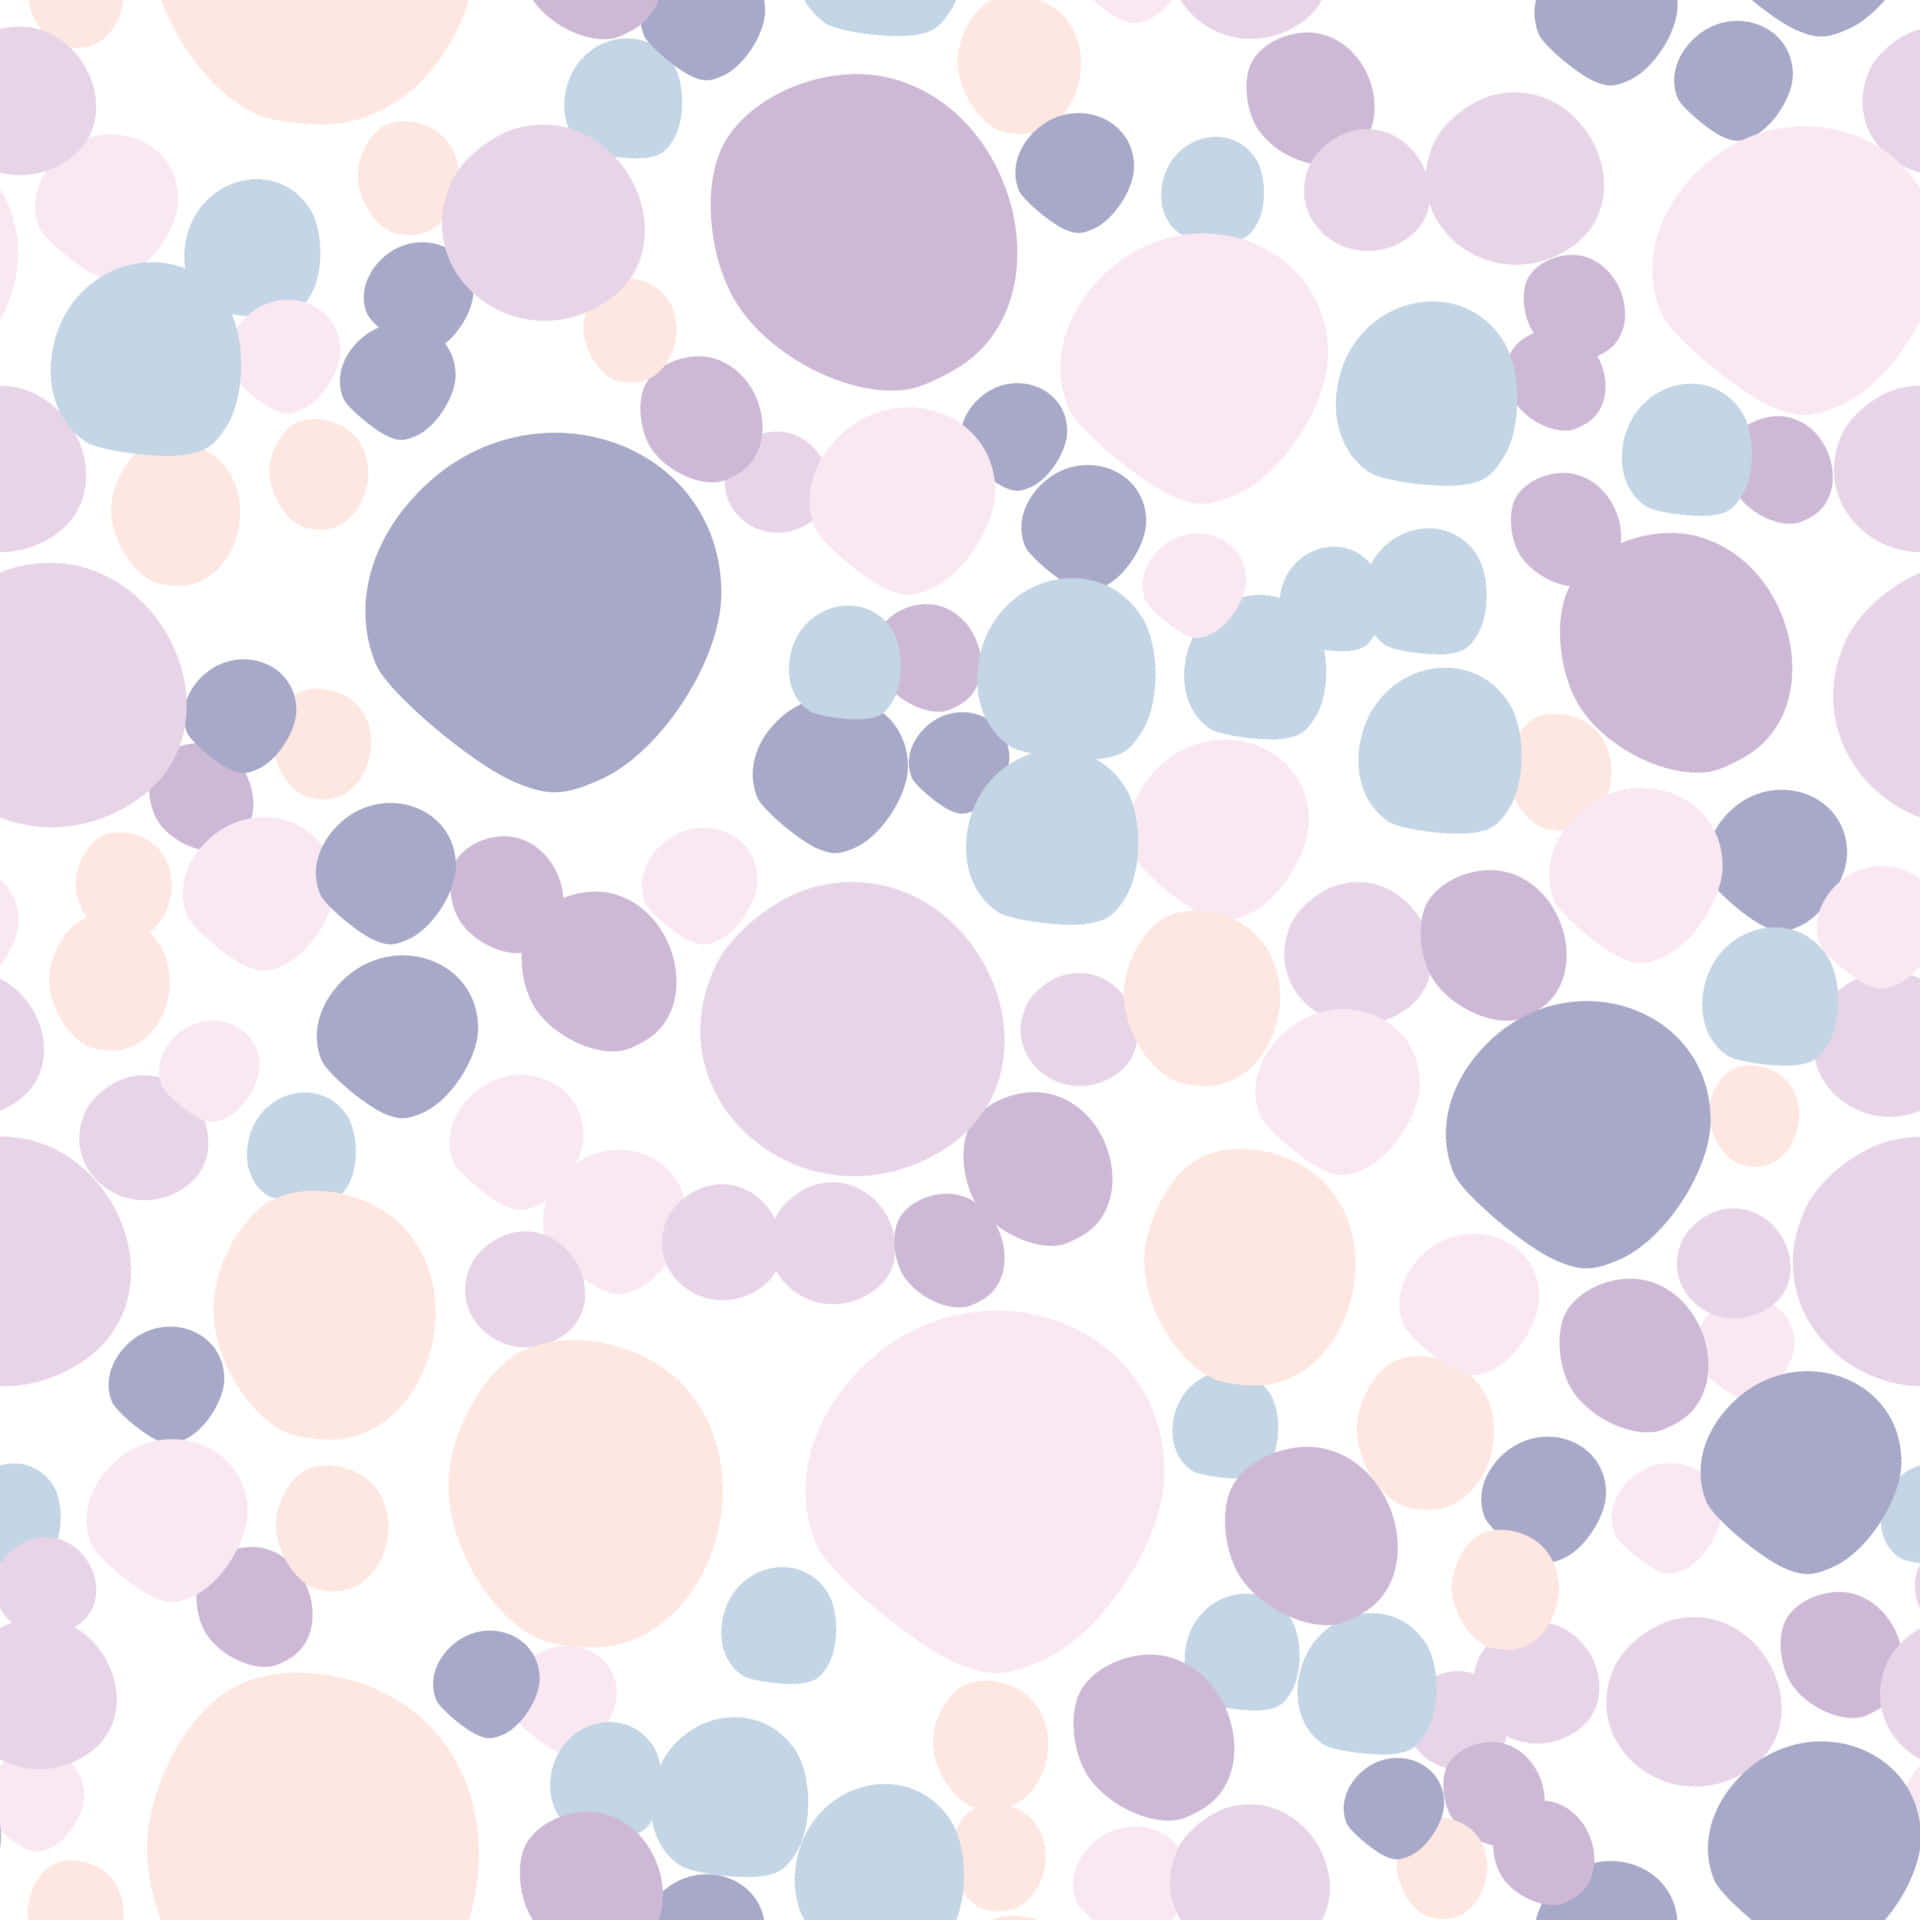 Overlapping Purple Pink And White Polka Dots Wallpaper